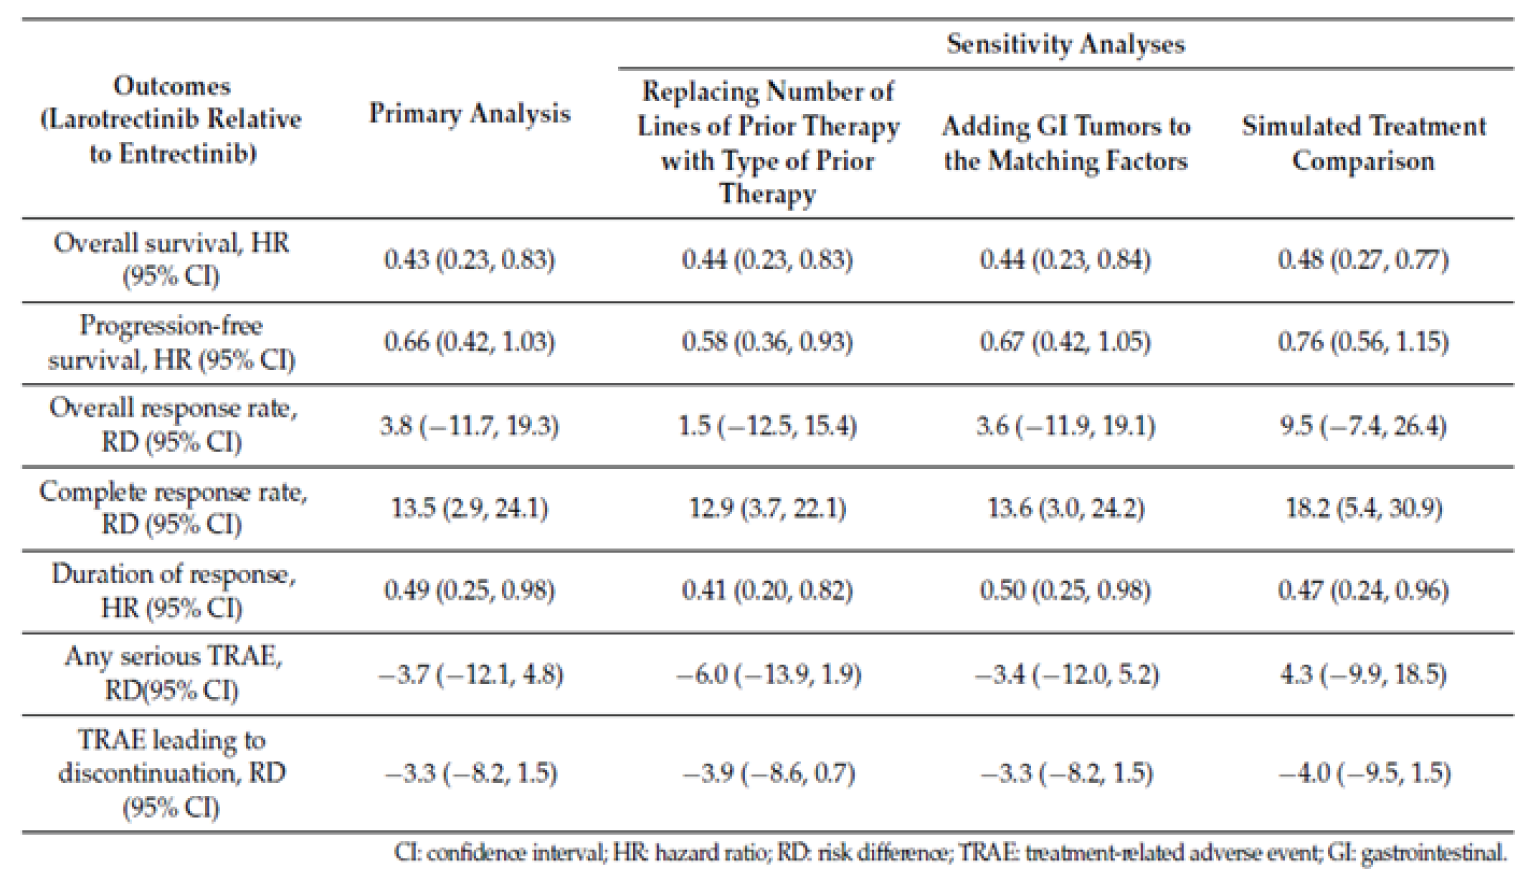 Figure shows a summary of the sensitivity analysis results from the matching-adjusted indirect comparison reported by Garcia-Foncillas et al. (2022).